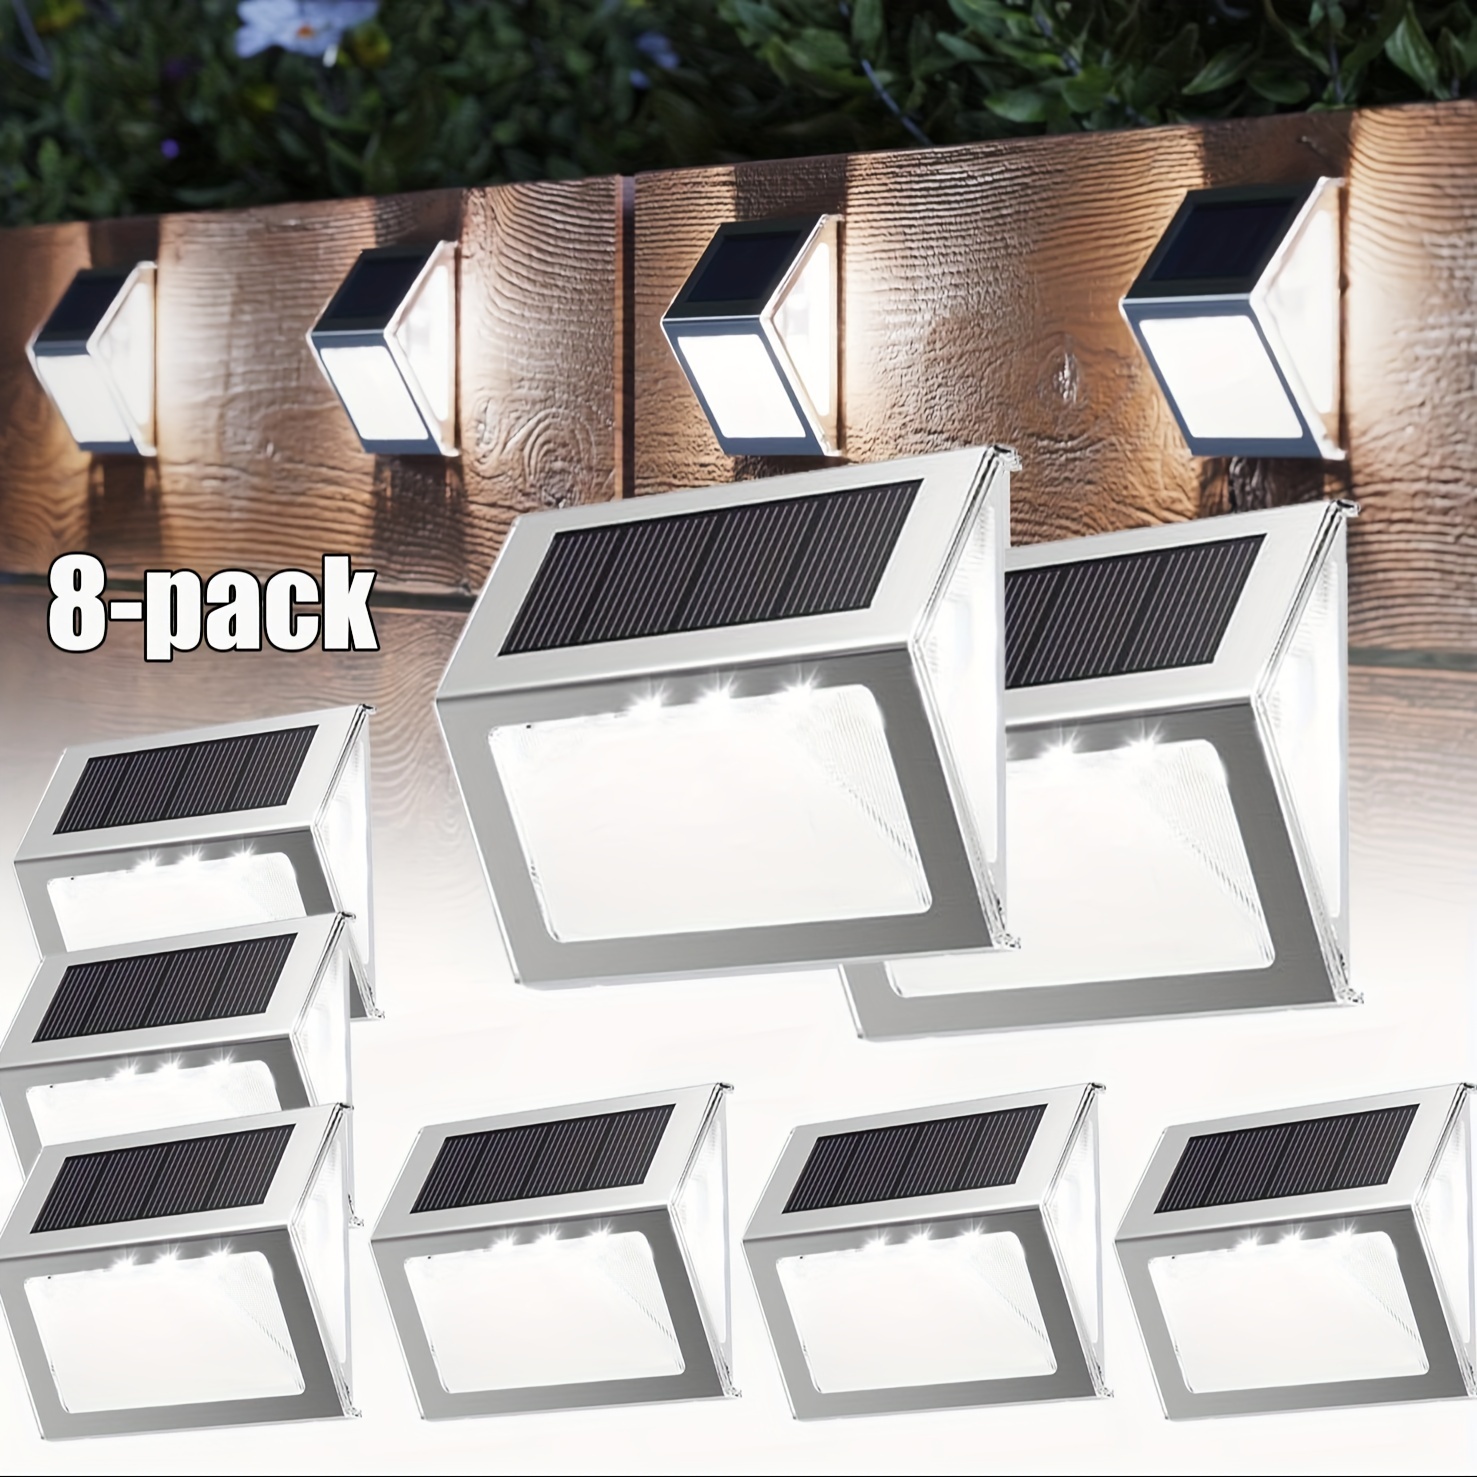 

Jackyled 8 Pack Solar Step Lights Outdoor, 3-side 7 Led Brighter Solar Deck Lights Stainless Steel Waterproof Solar Fence Lighting For Stair, Patio, Fence, Step, Garden (cool White)